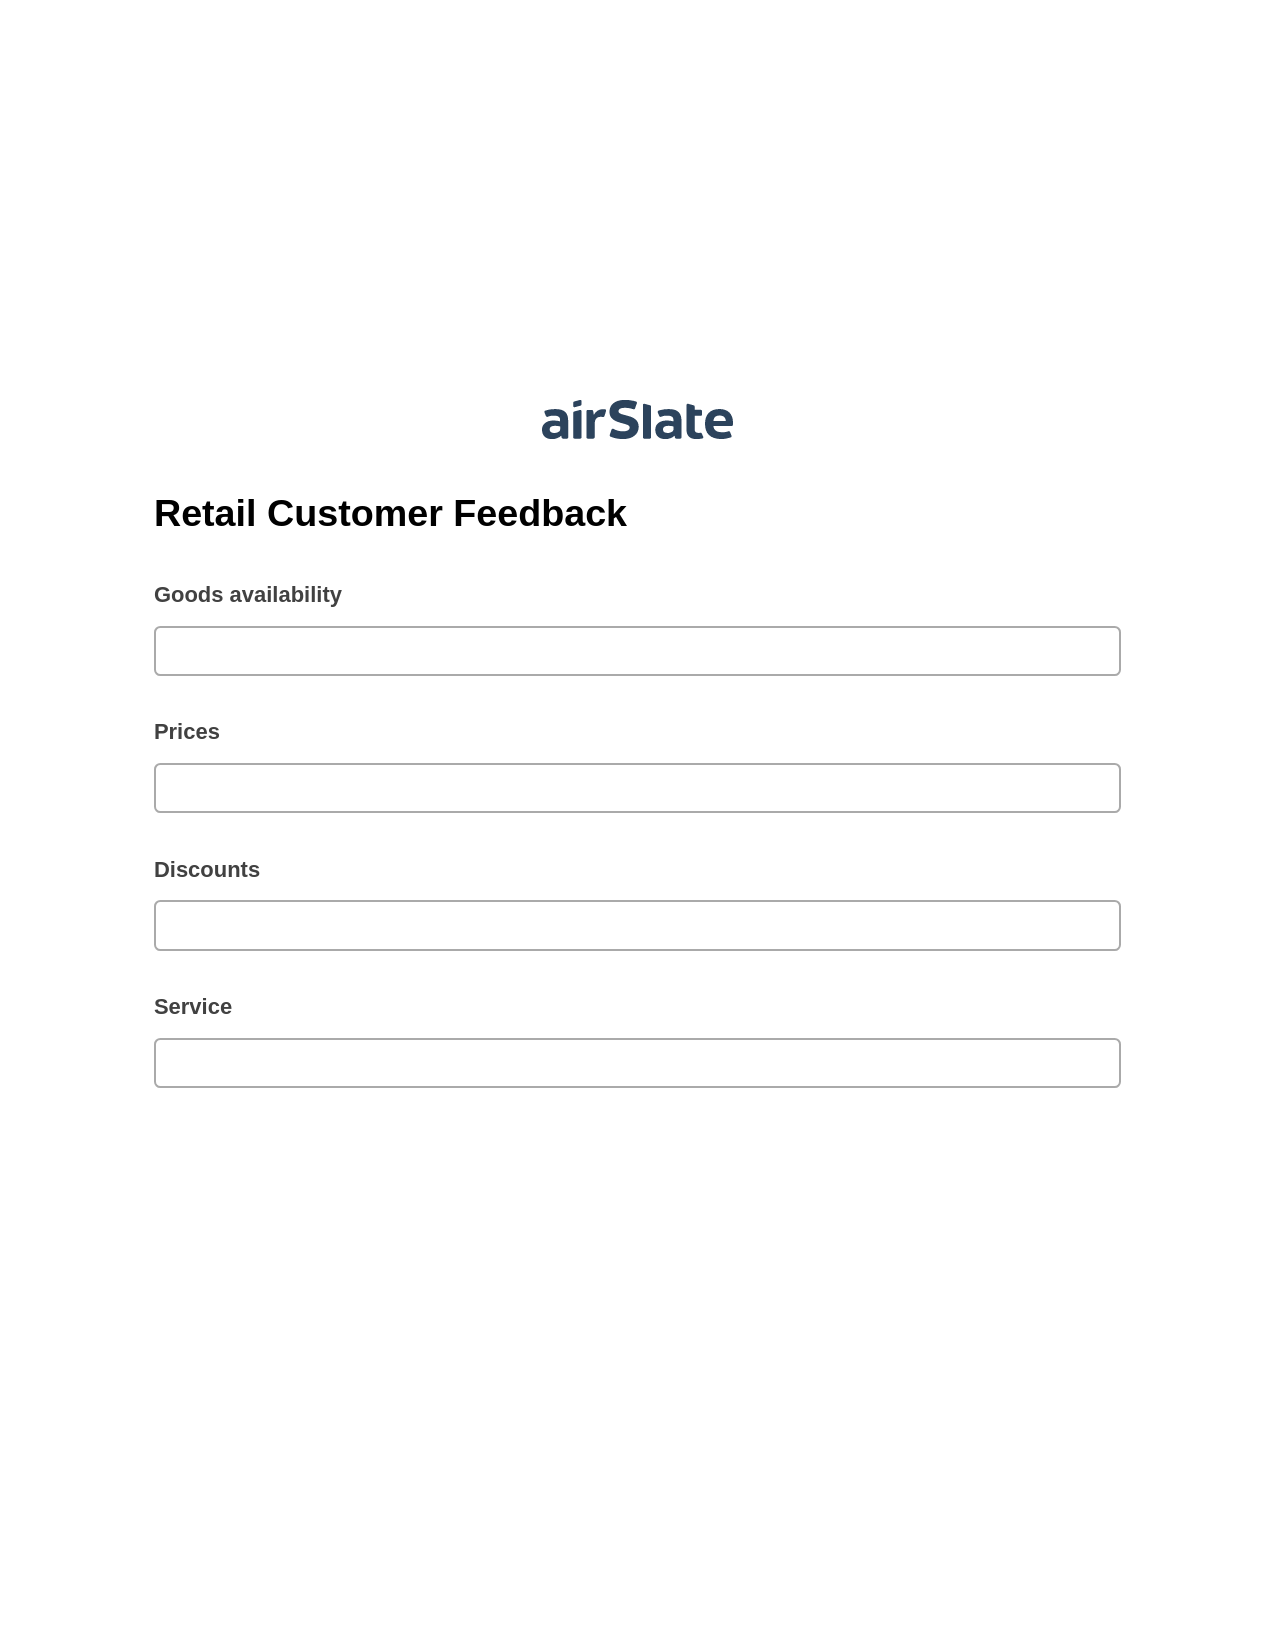 Retail Customer Feedback Pre-fill Dropdowns from Excel Bot, Document Hide Bot, Export to Google Sheet Bot